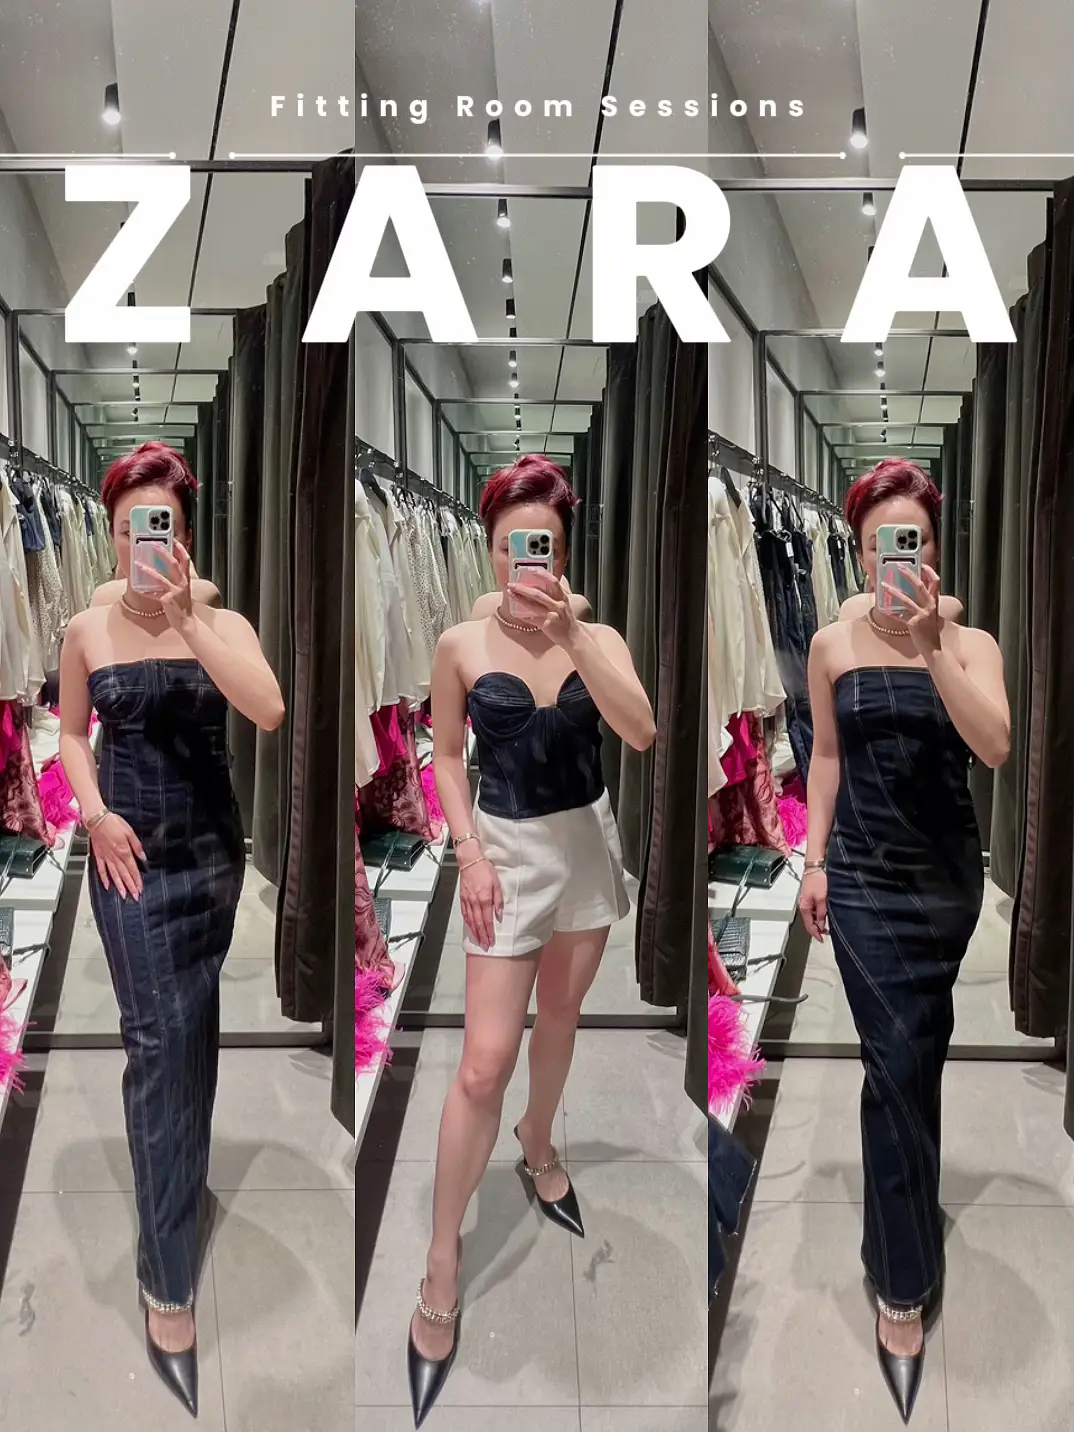 Fitting Room Sessions, Zara Denim, Gallery posted by Minou